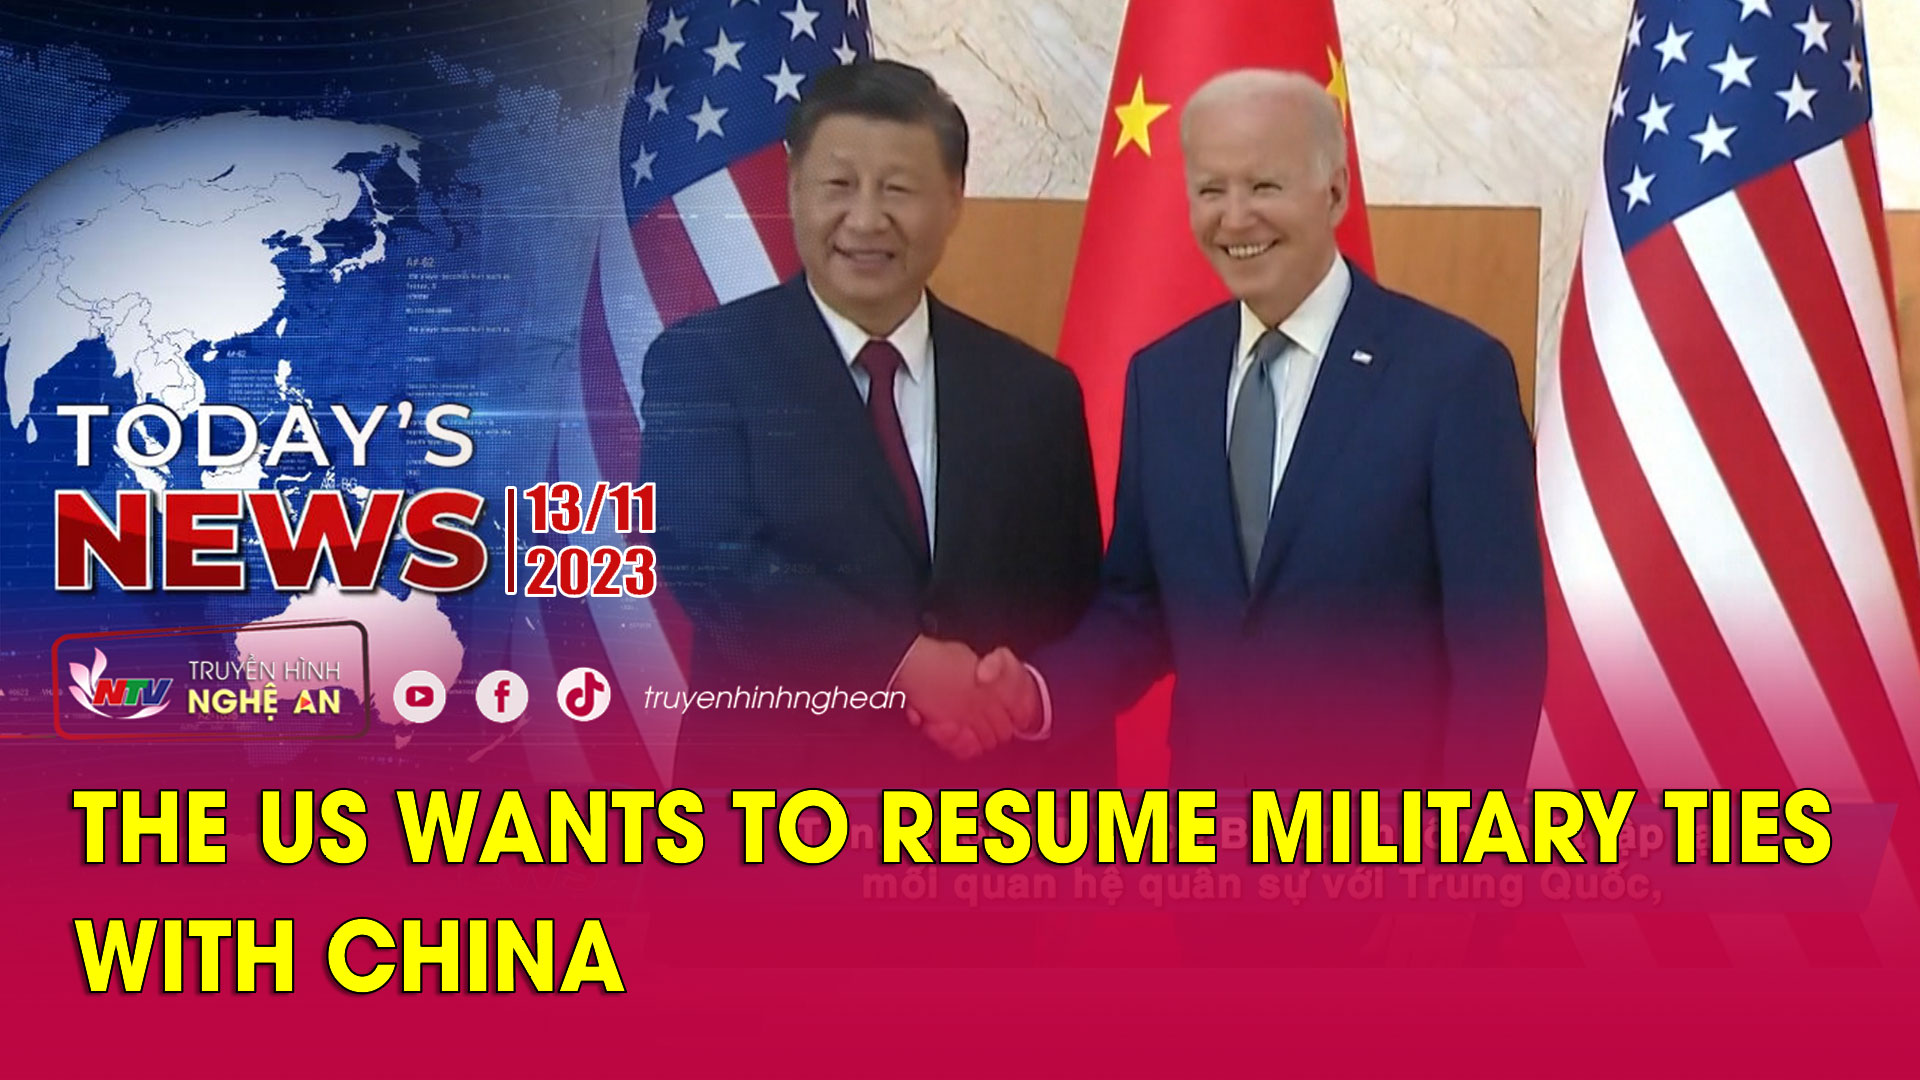 Today's News - 13/11/2023: The US wants to resume military ties with China